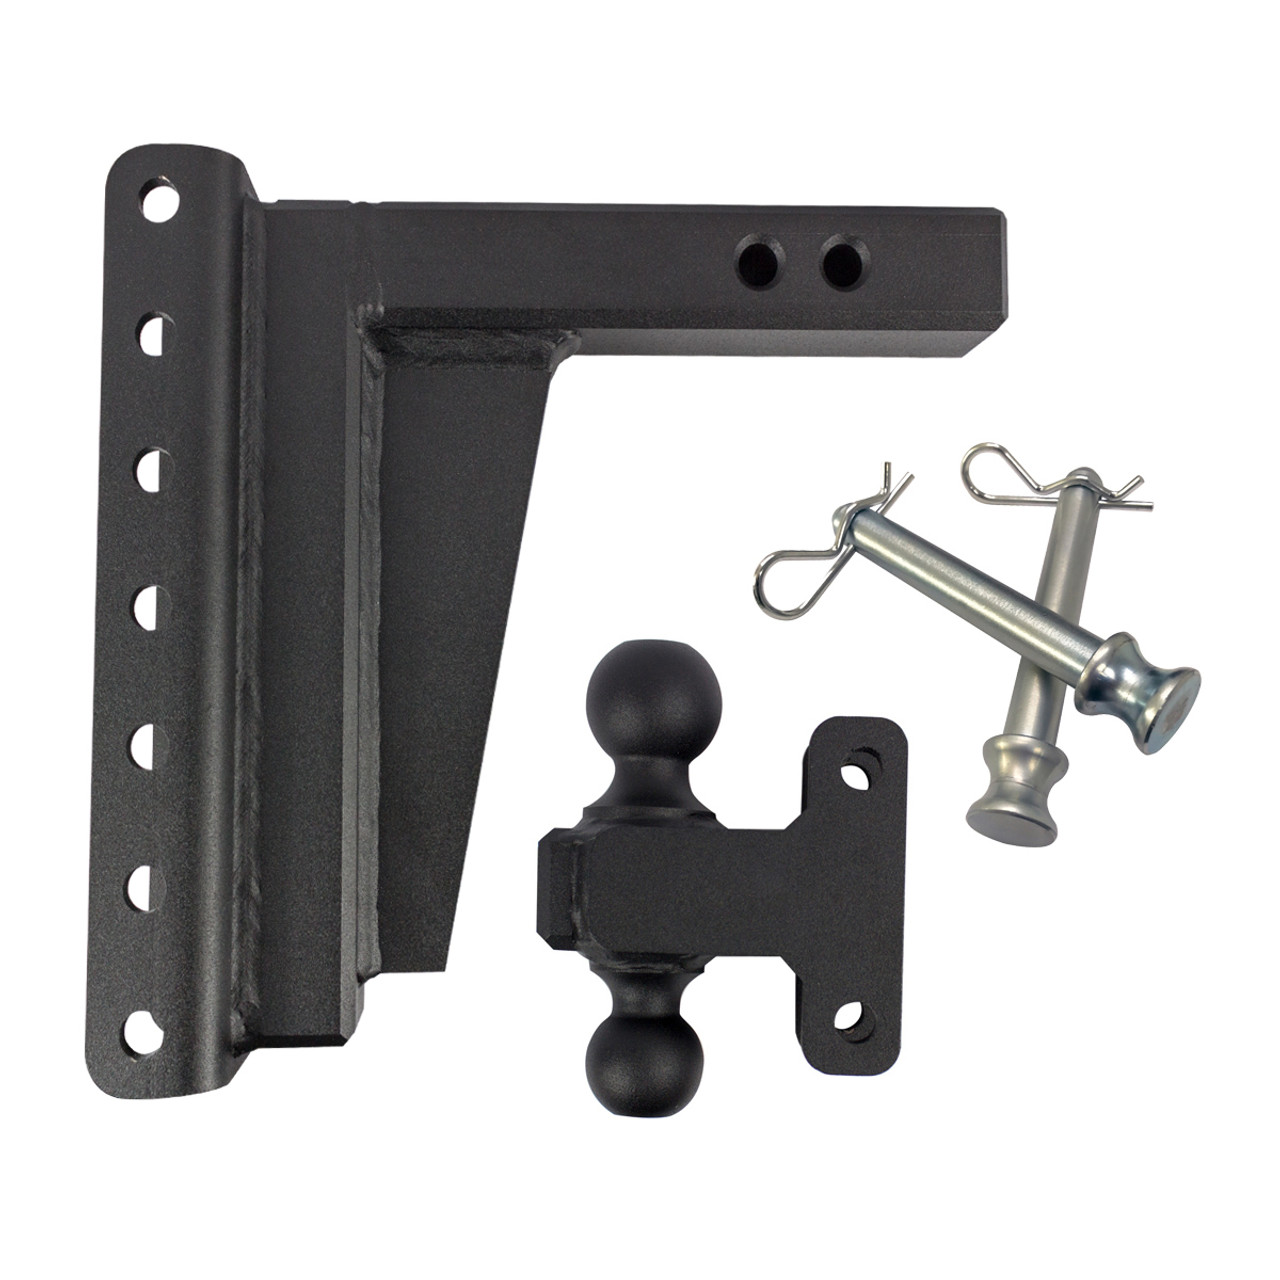 2.0” Extreme Duty 8” Drop/Rise Trailer Hitch